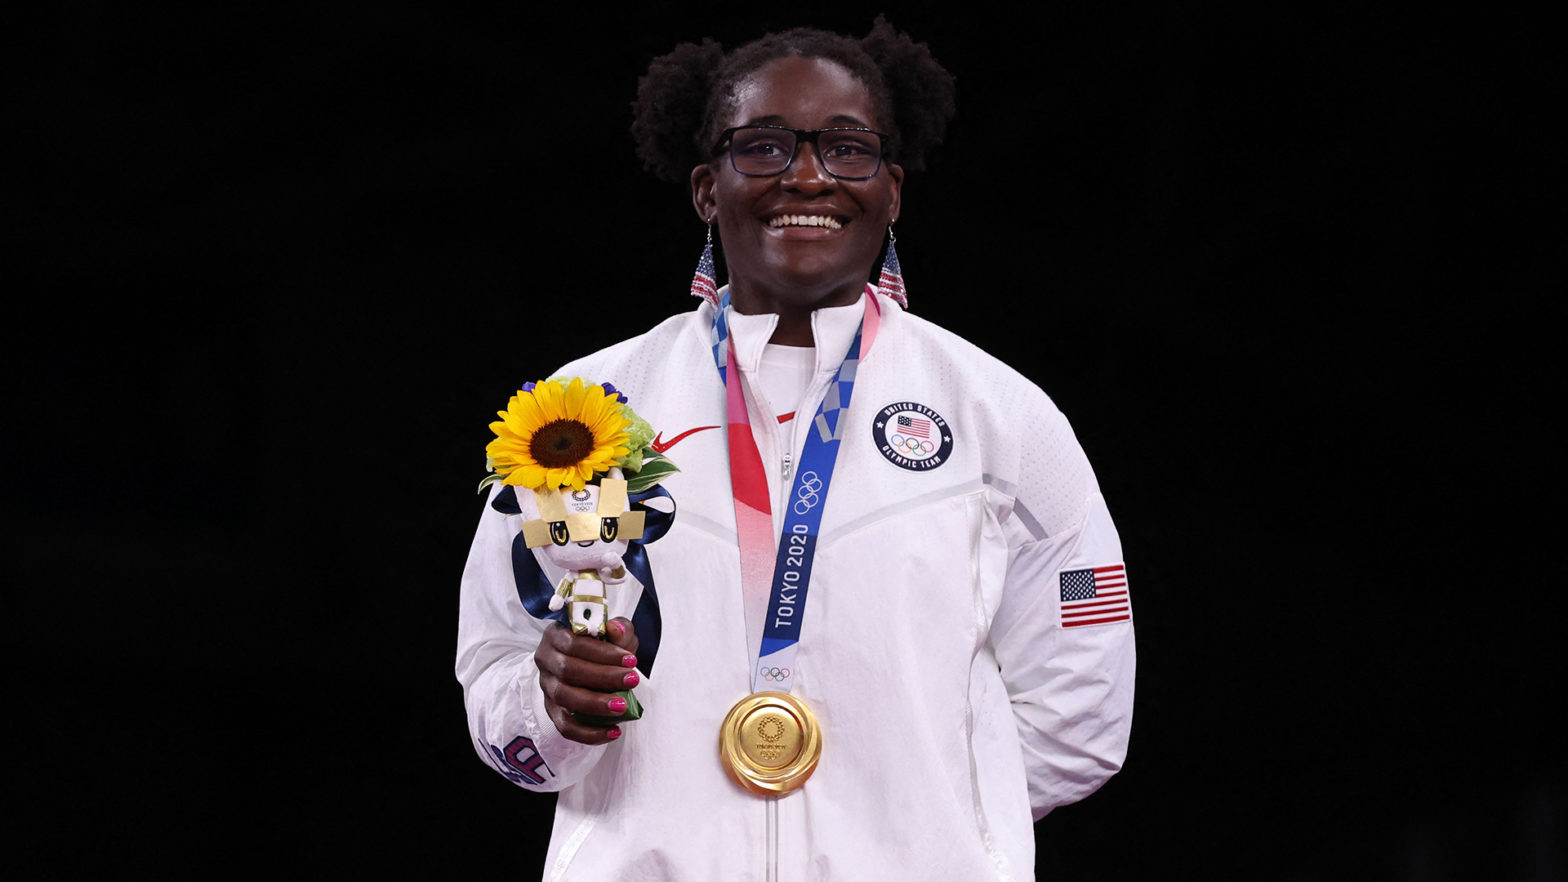 Gold Medalist Tamyra Mensah-Stock To Use Earnings From The Summer Olympics To Purchase A Food Truck For Her Mother